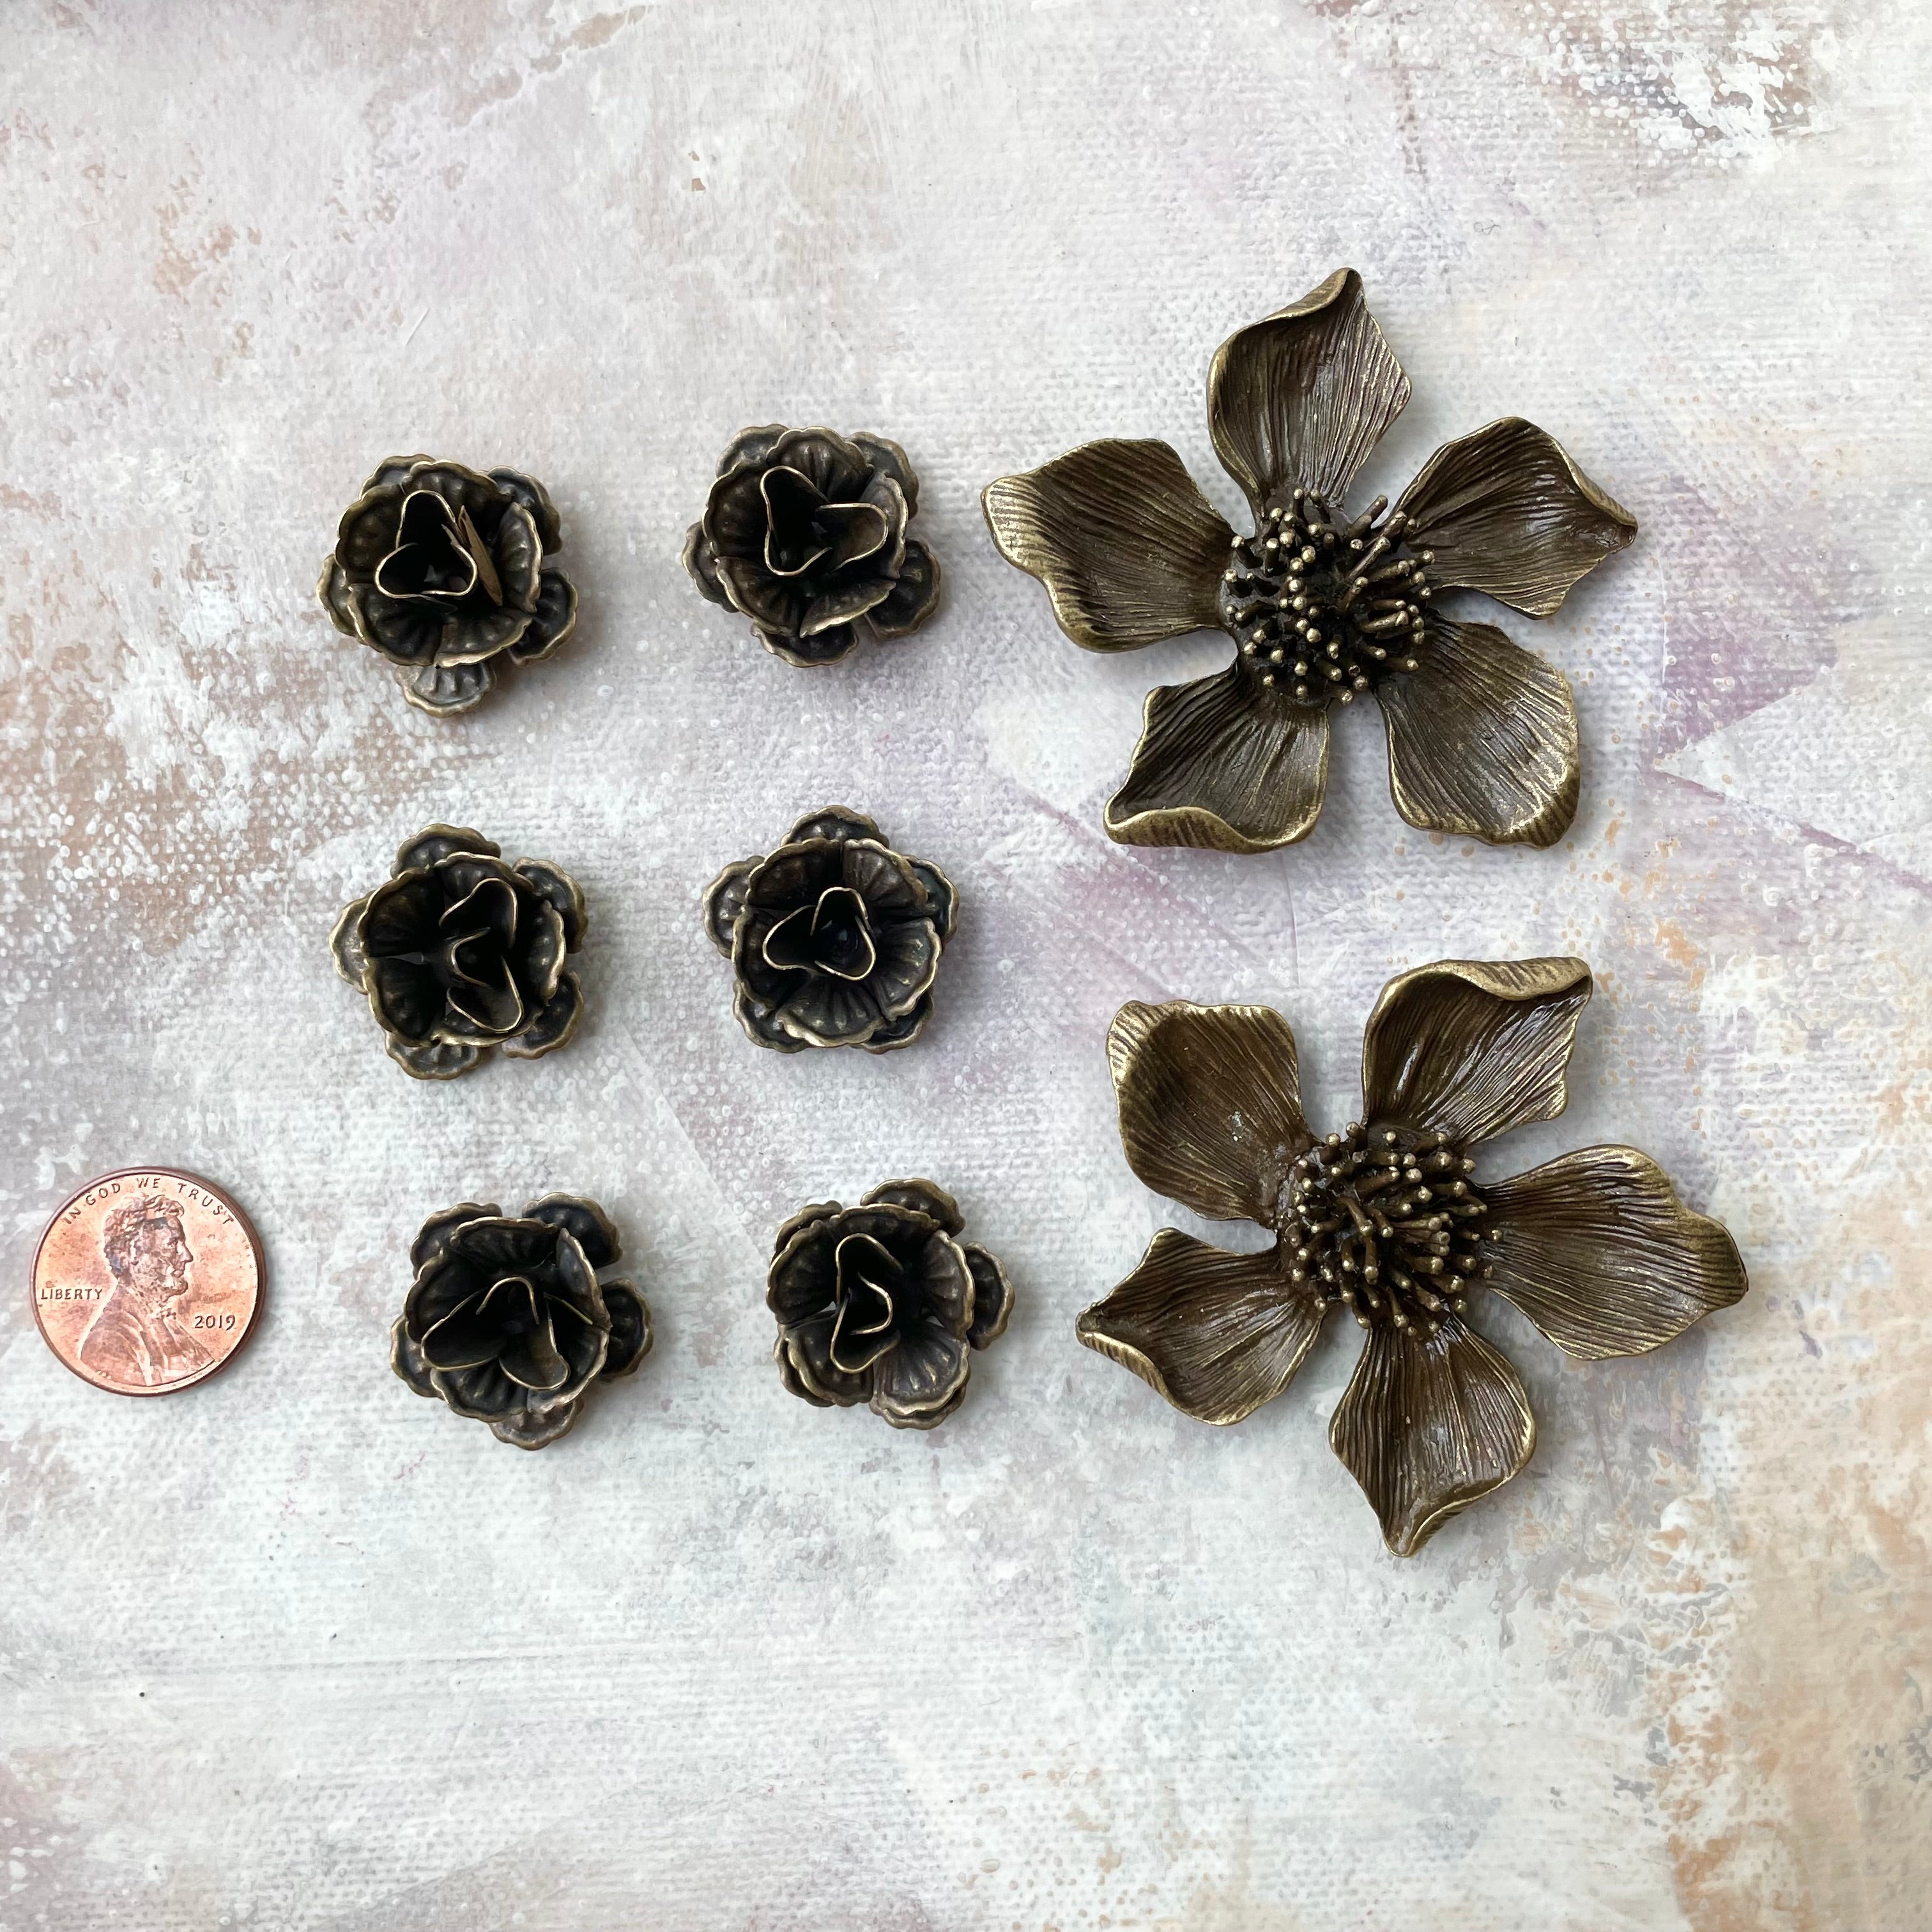 6 small metal styling flowers 2 larger metal styling flowers with penny beside for size reference - flat lay props from Champagne & GRIT